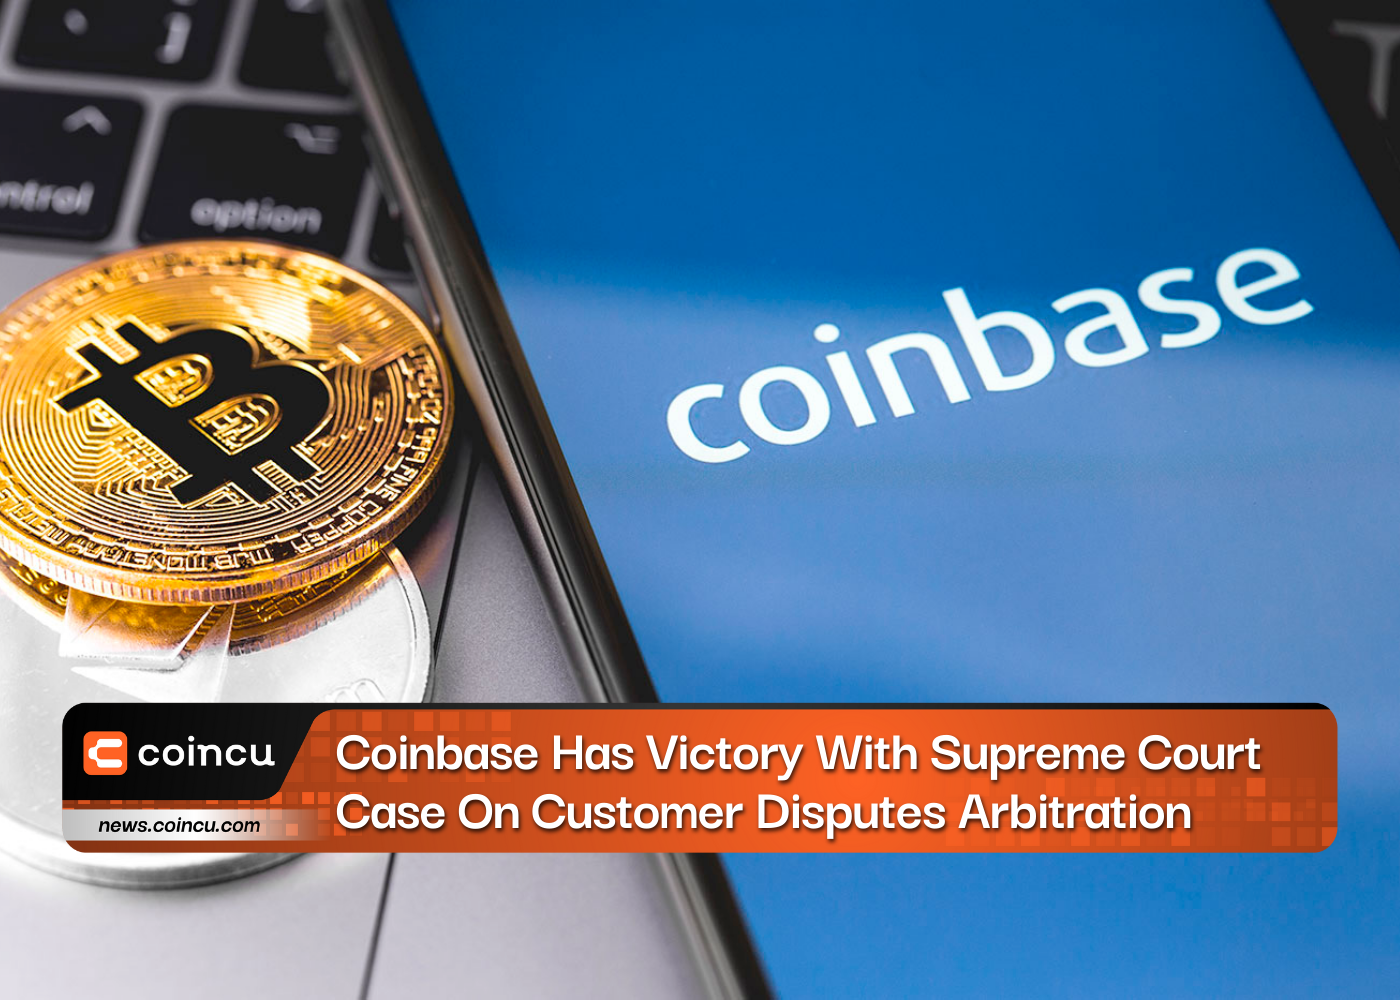 Coinbase Has Victory With Supreme Court Case On Customer Disputes Arbitration